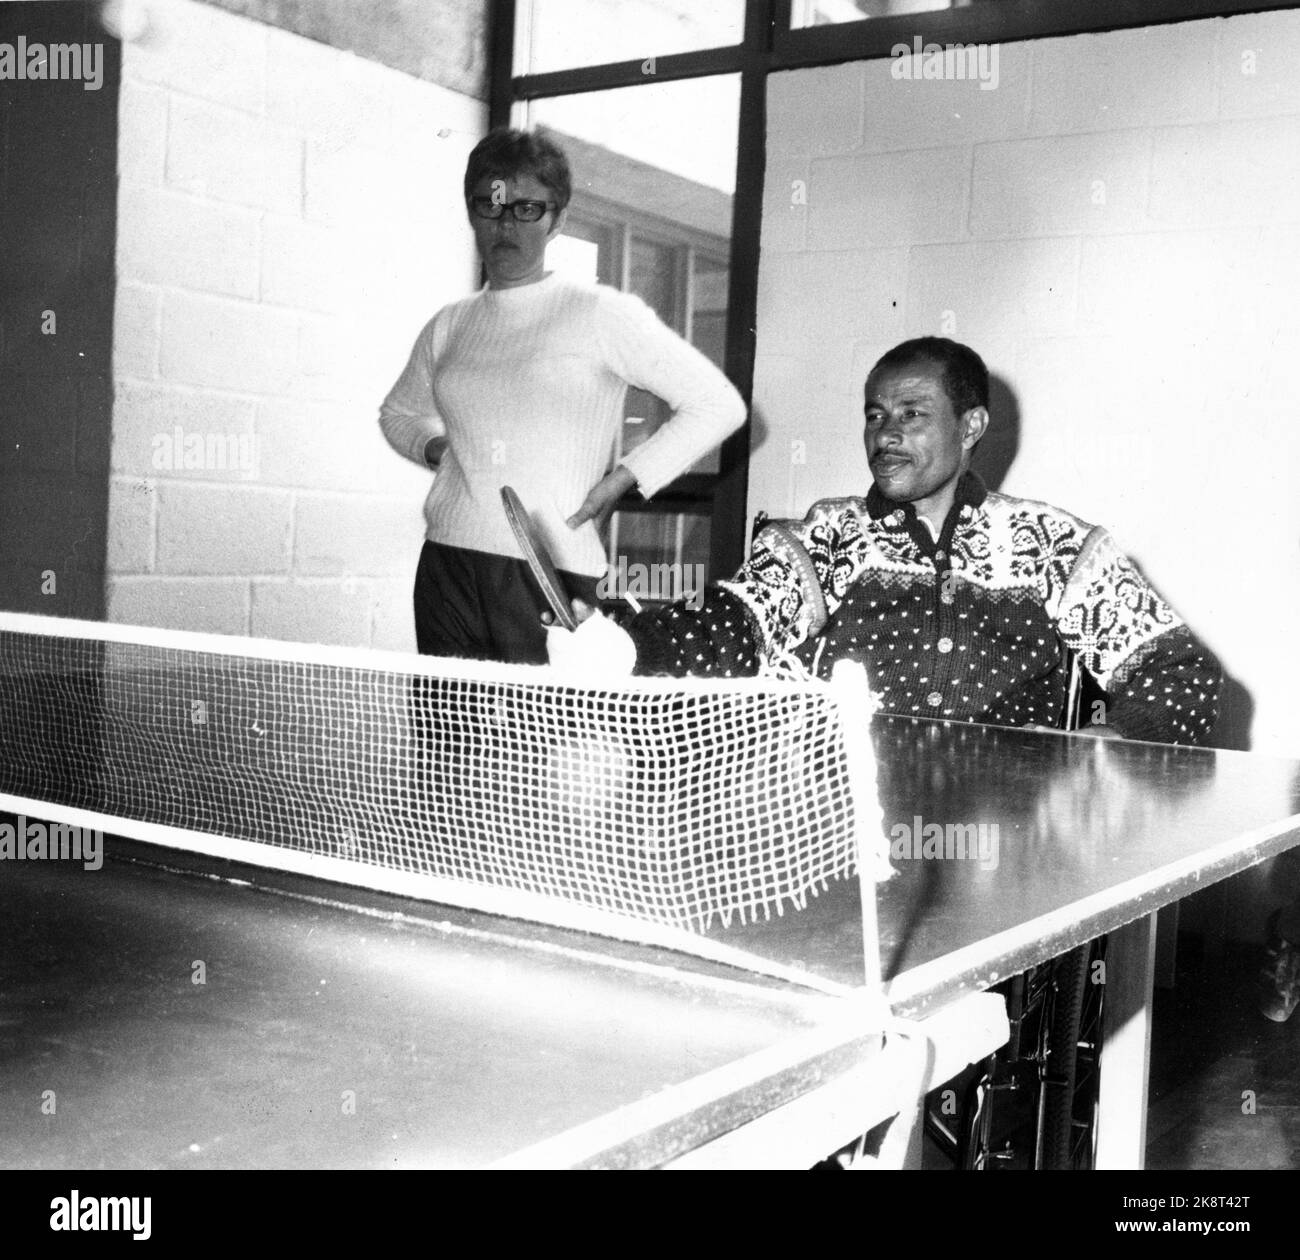 Beitostølen 1971 Abebe Bikila from Ethiopia, twice Olympic champion in the marathon, visits Beitostølen after an invitation from Erling Stordahl. He became paralyzed after a car accident three years ago. Here he plays table tennis. Photo: Ivar Aaserud / Current / NTB Stock Photo